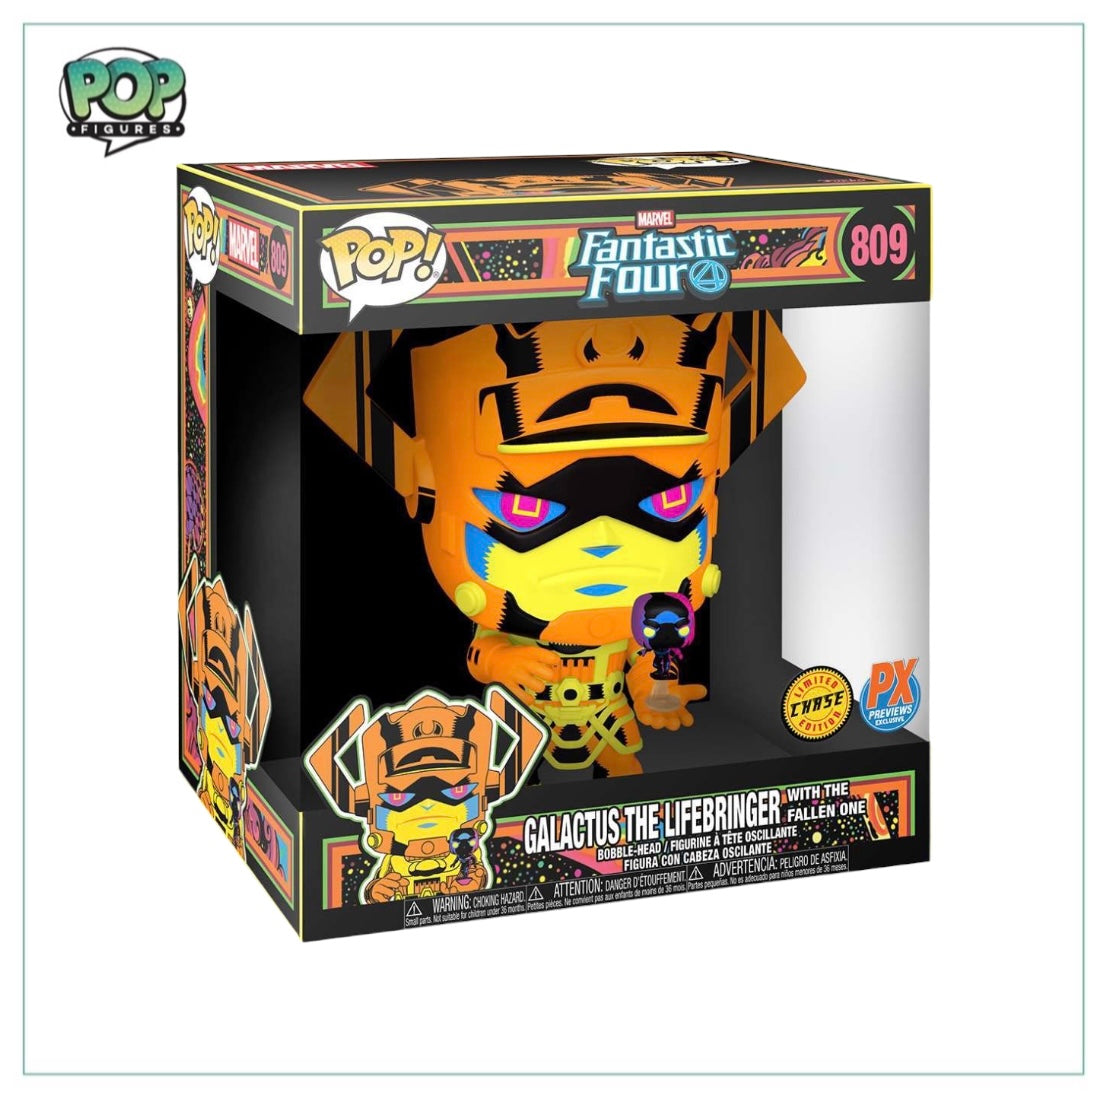 Galactus the Lifebringer with the Fallen One #809 (Blacklight Chase) 10" Funko Pop! - The Fantastic Four - Px Previews Exclusive